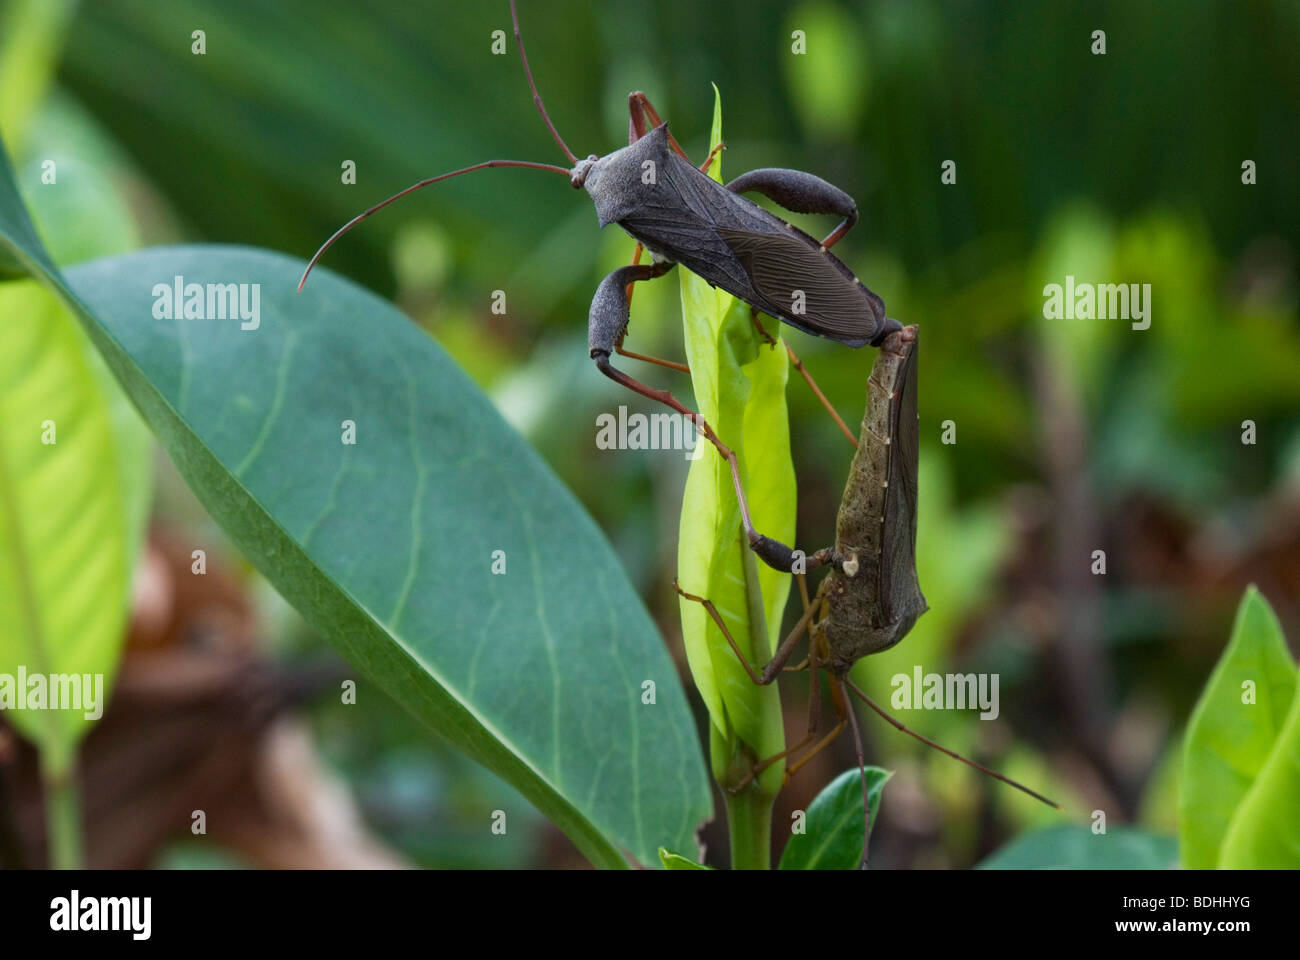 Close-up of a pair of Leaf-footed bugs mating. Stock Photo